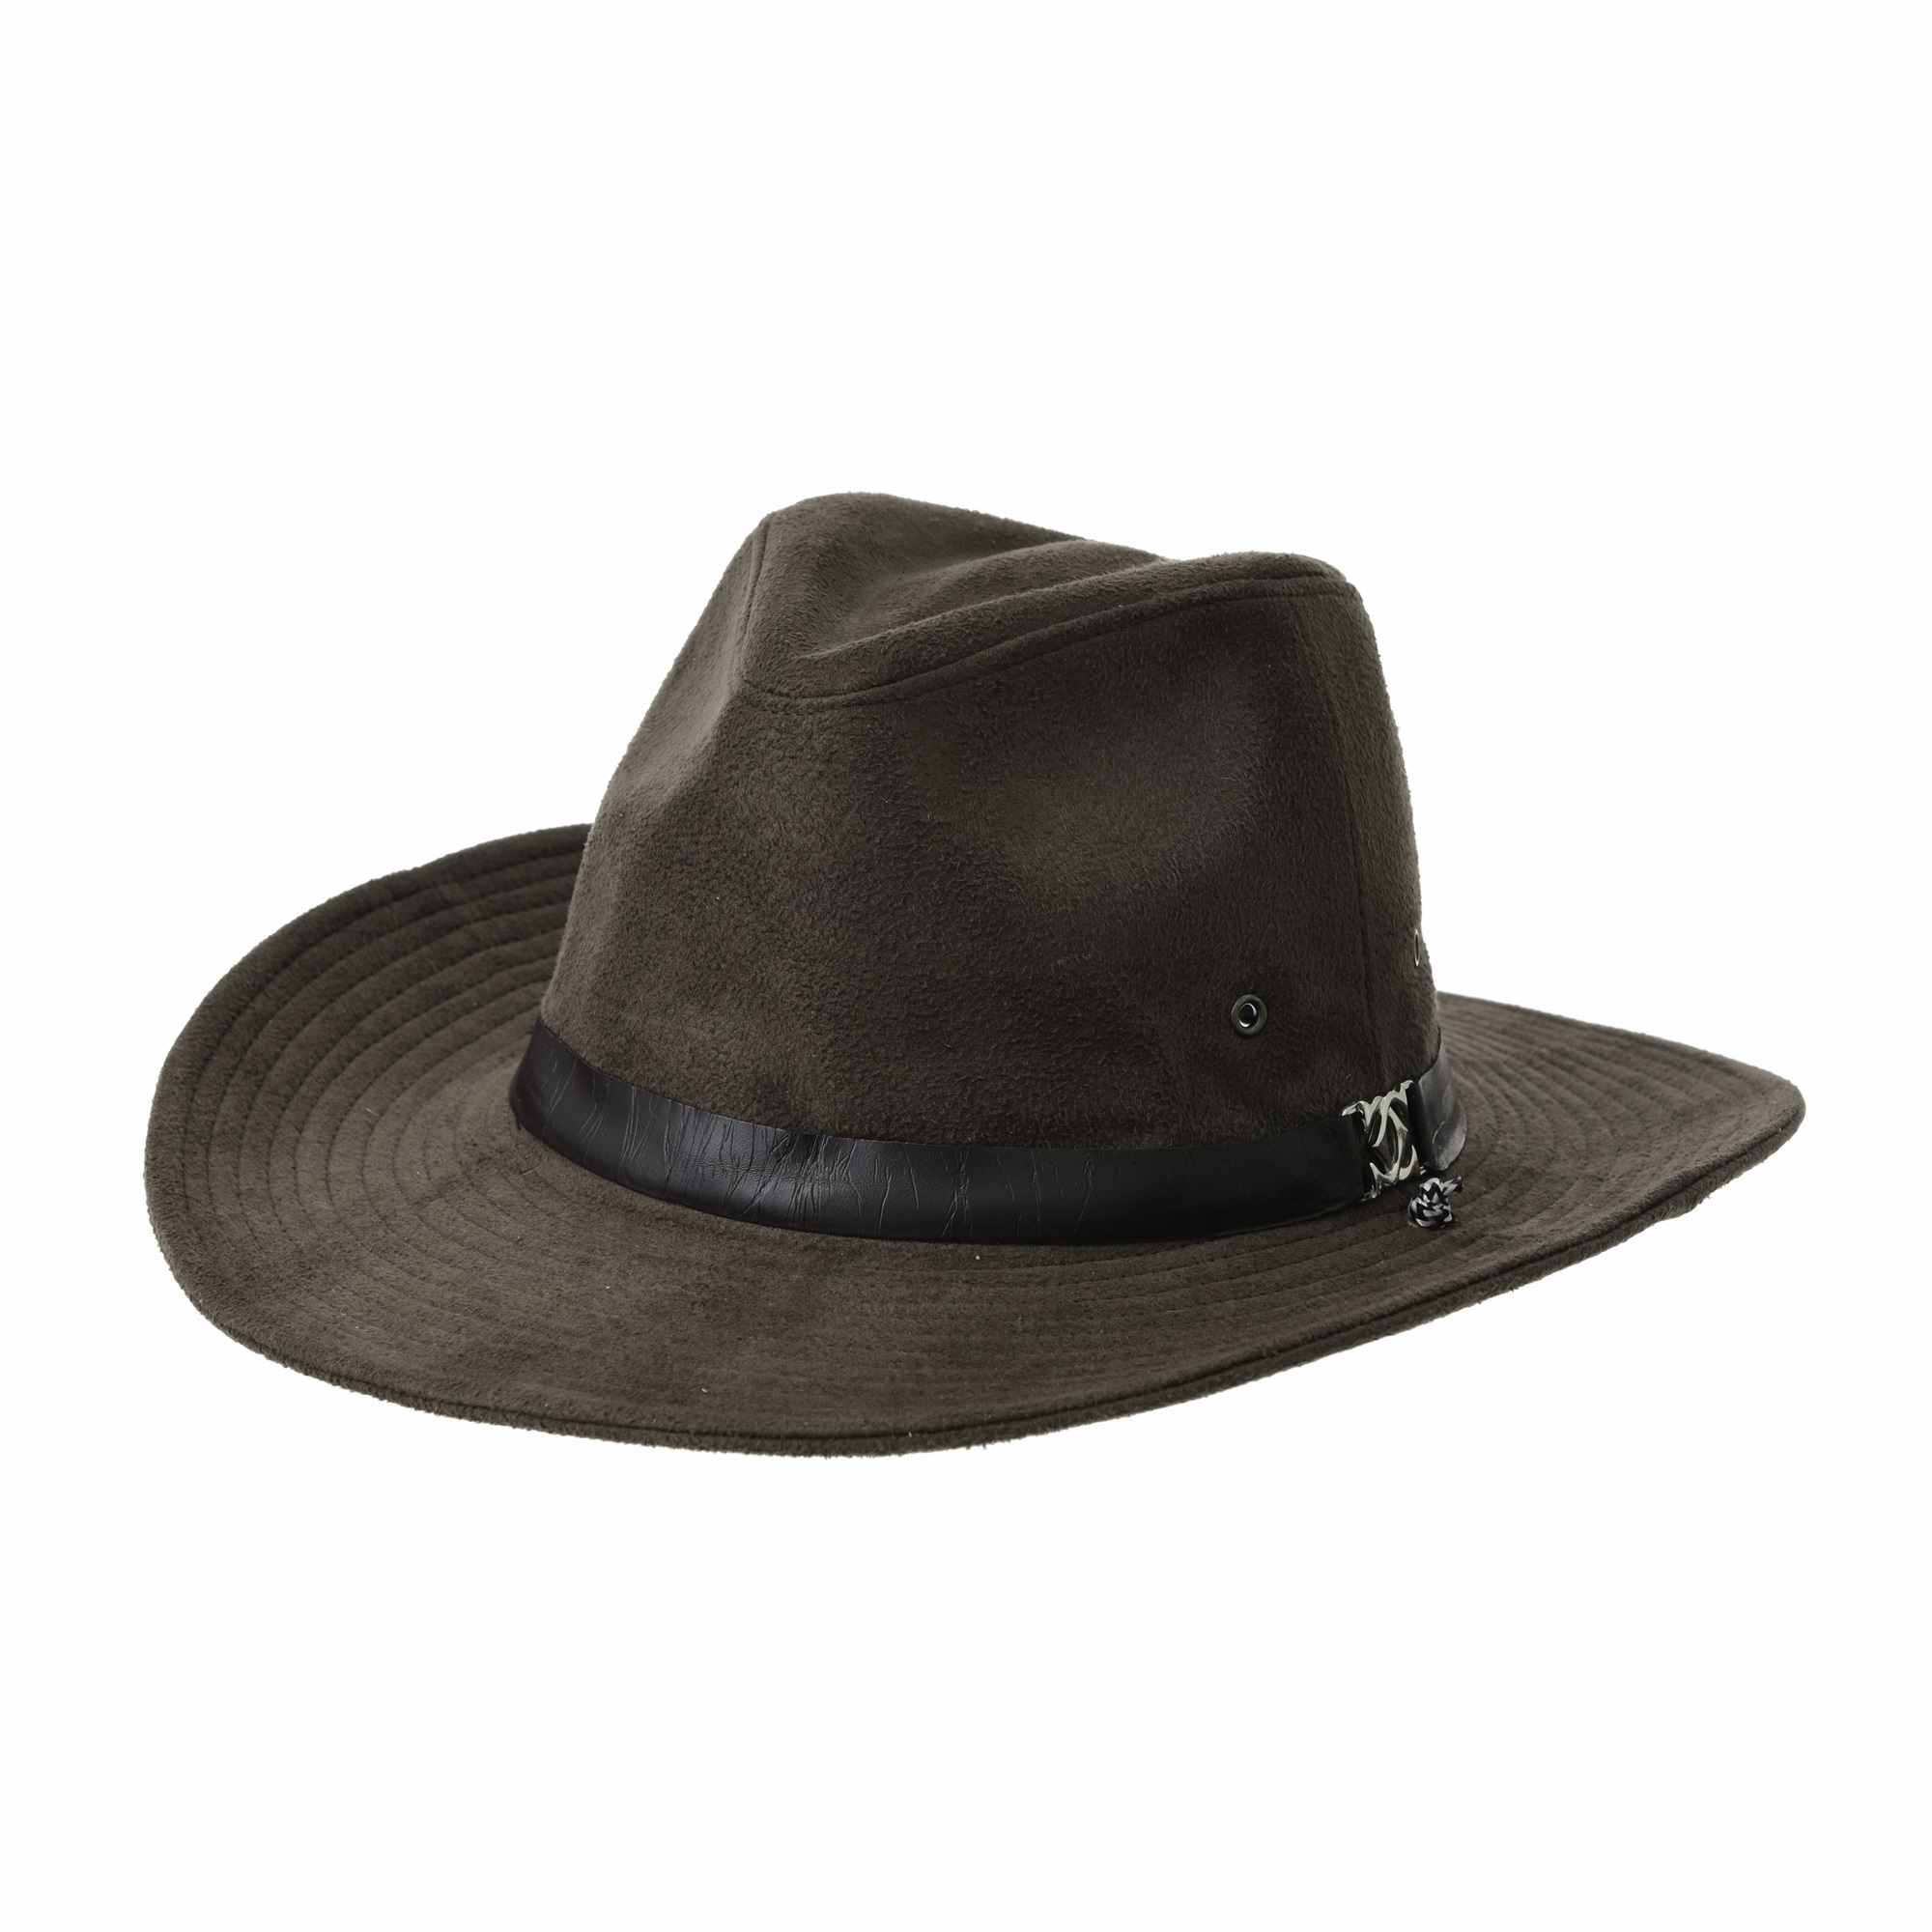 WITHMOONS Suede Indiana Jones Hat Outback Hat Fedora With Cord CD8858 (Brown) - image 1 of 5